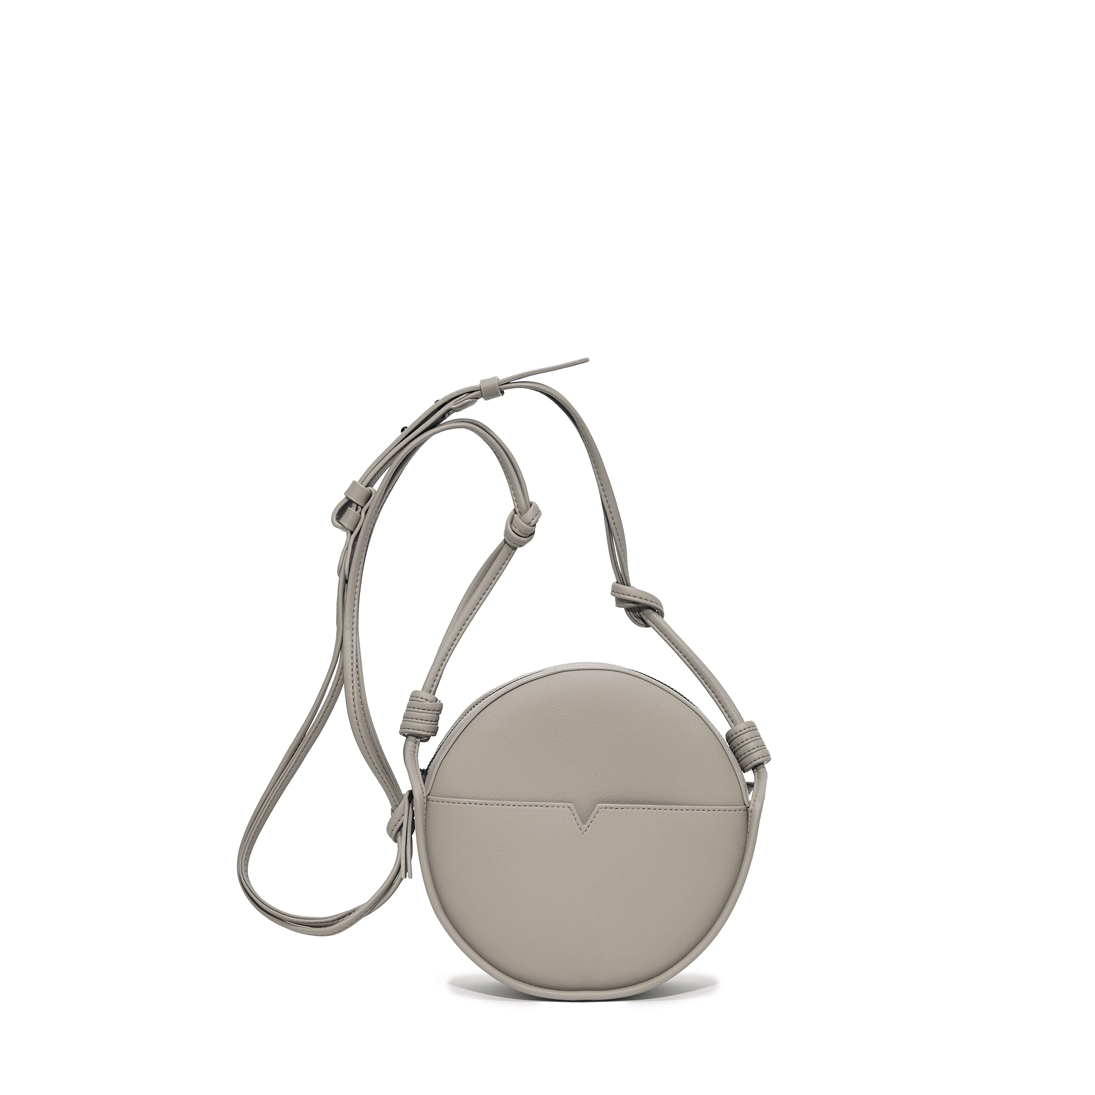 The Circle Crossbody in Banbū Leather in Stone image 10